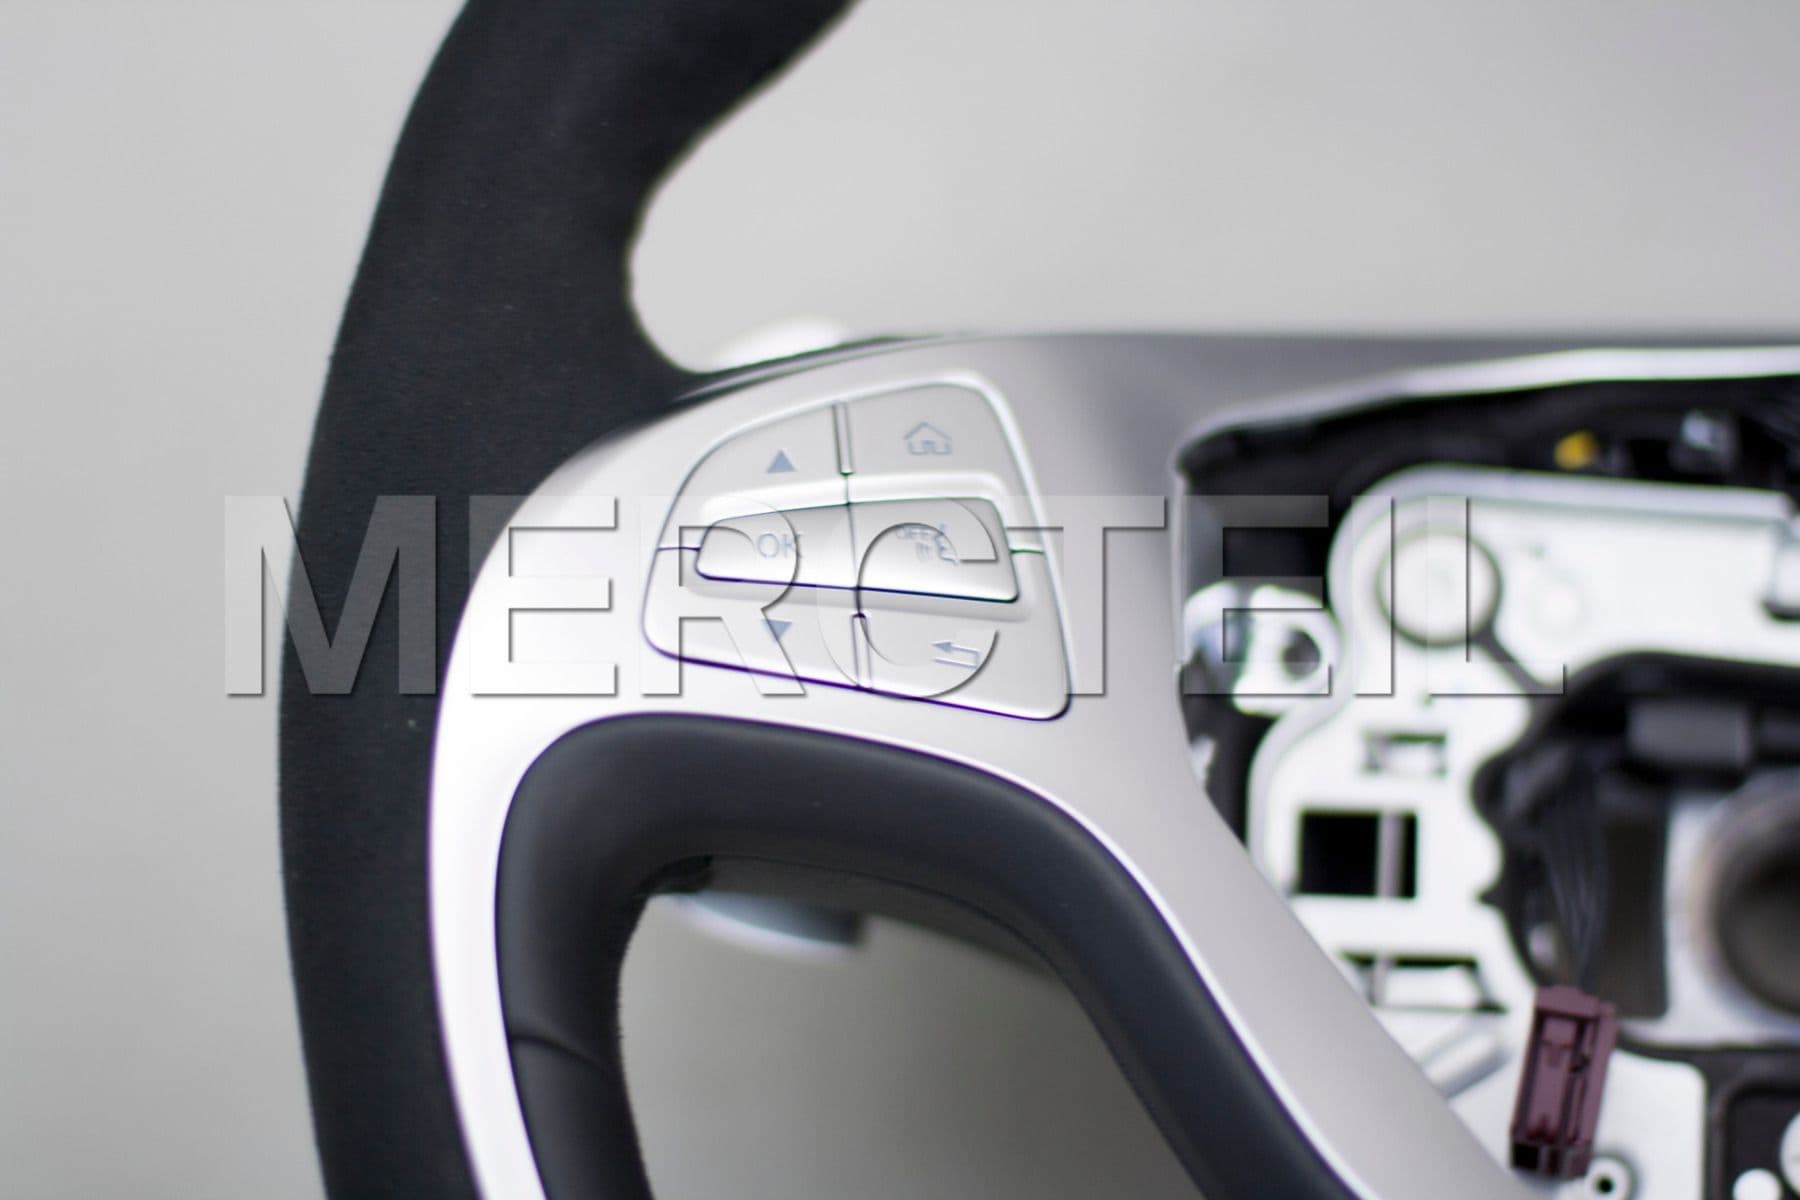 AMG Leather Black Steering Wheel with Alcantara Insections for S Class W222; A22246030039G60, A2224603003.